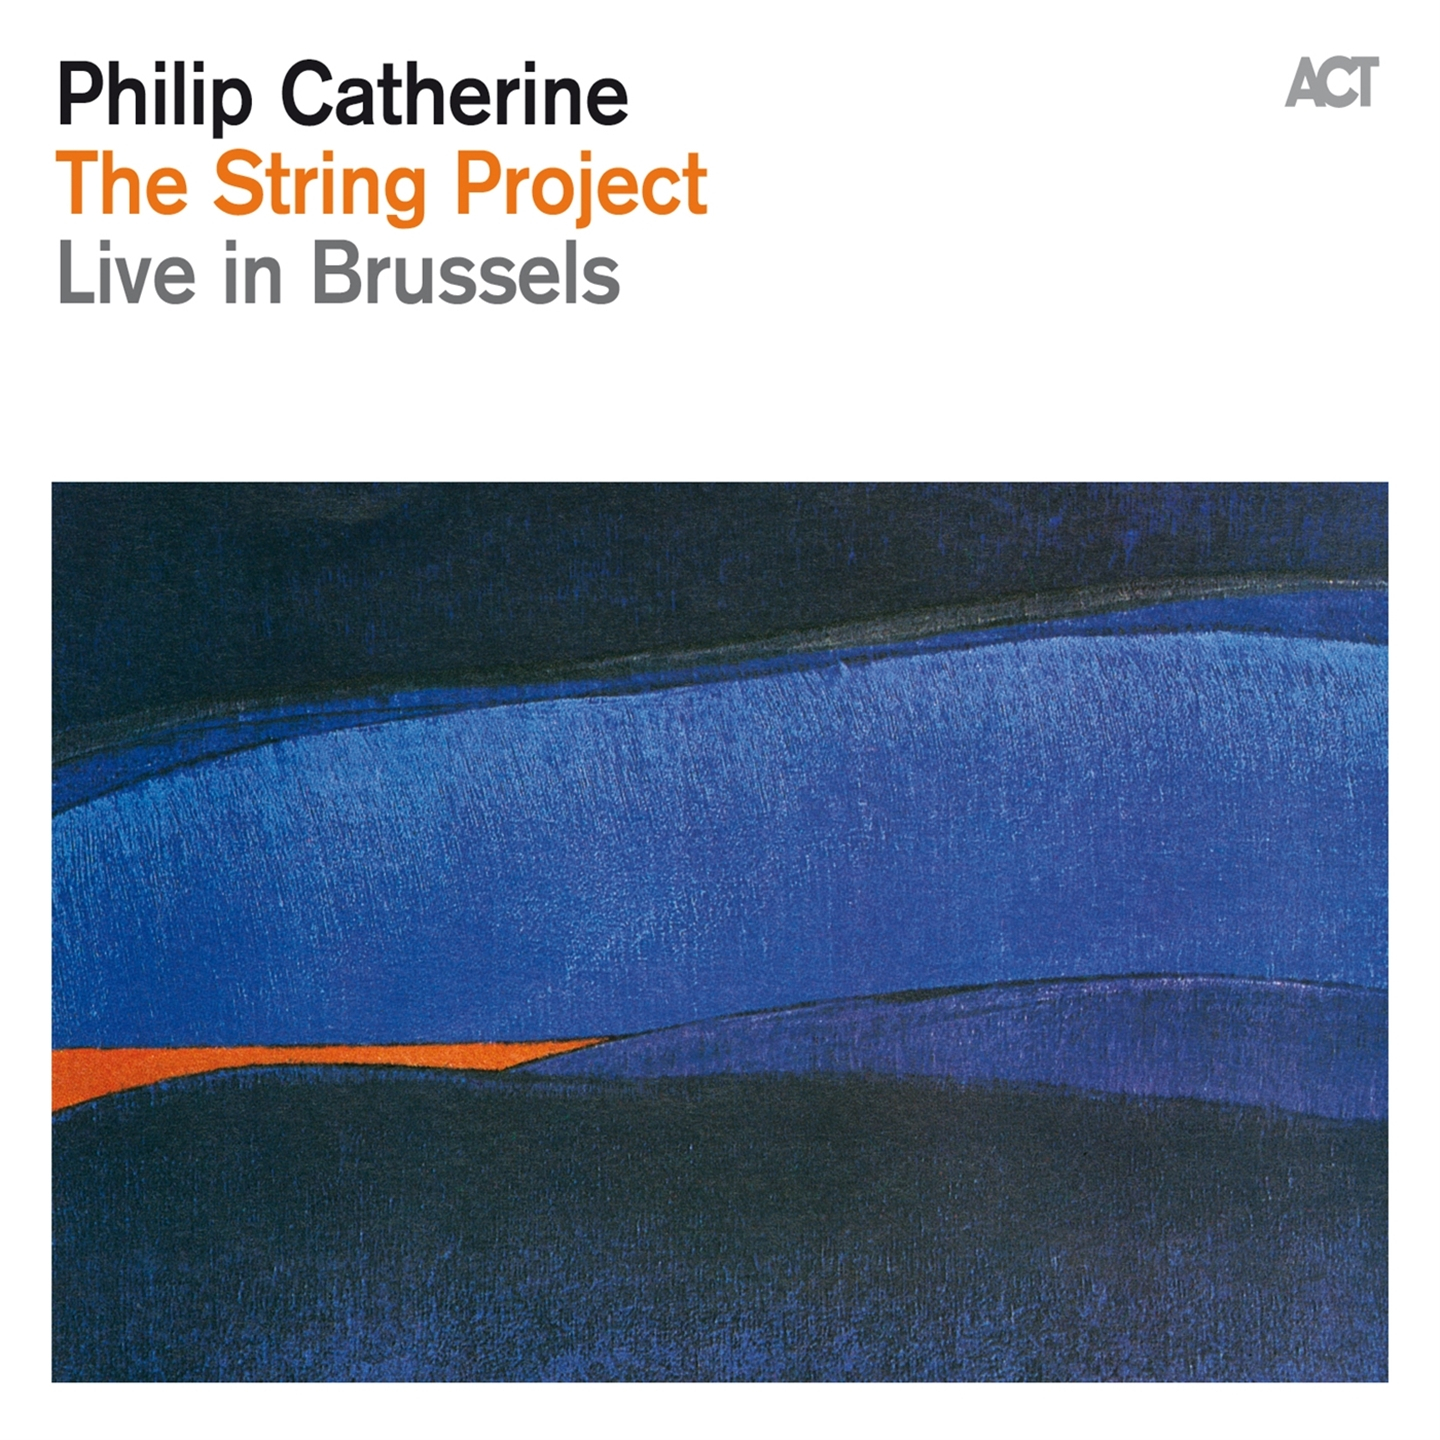 Philip Catherine - The String Project - Photo 1/1